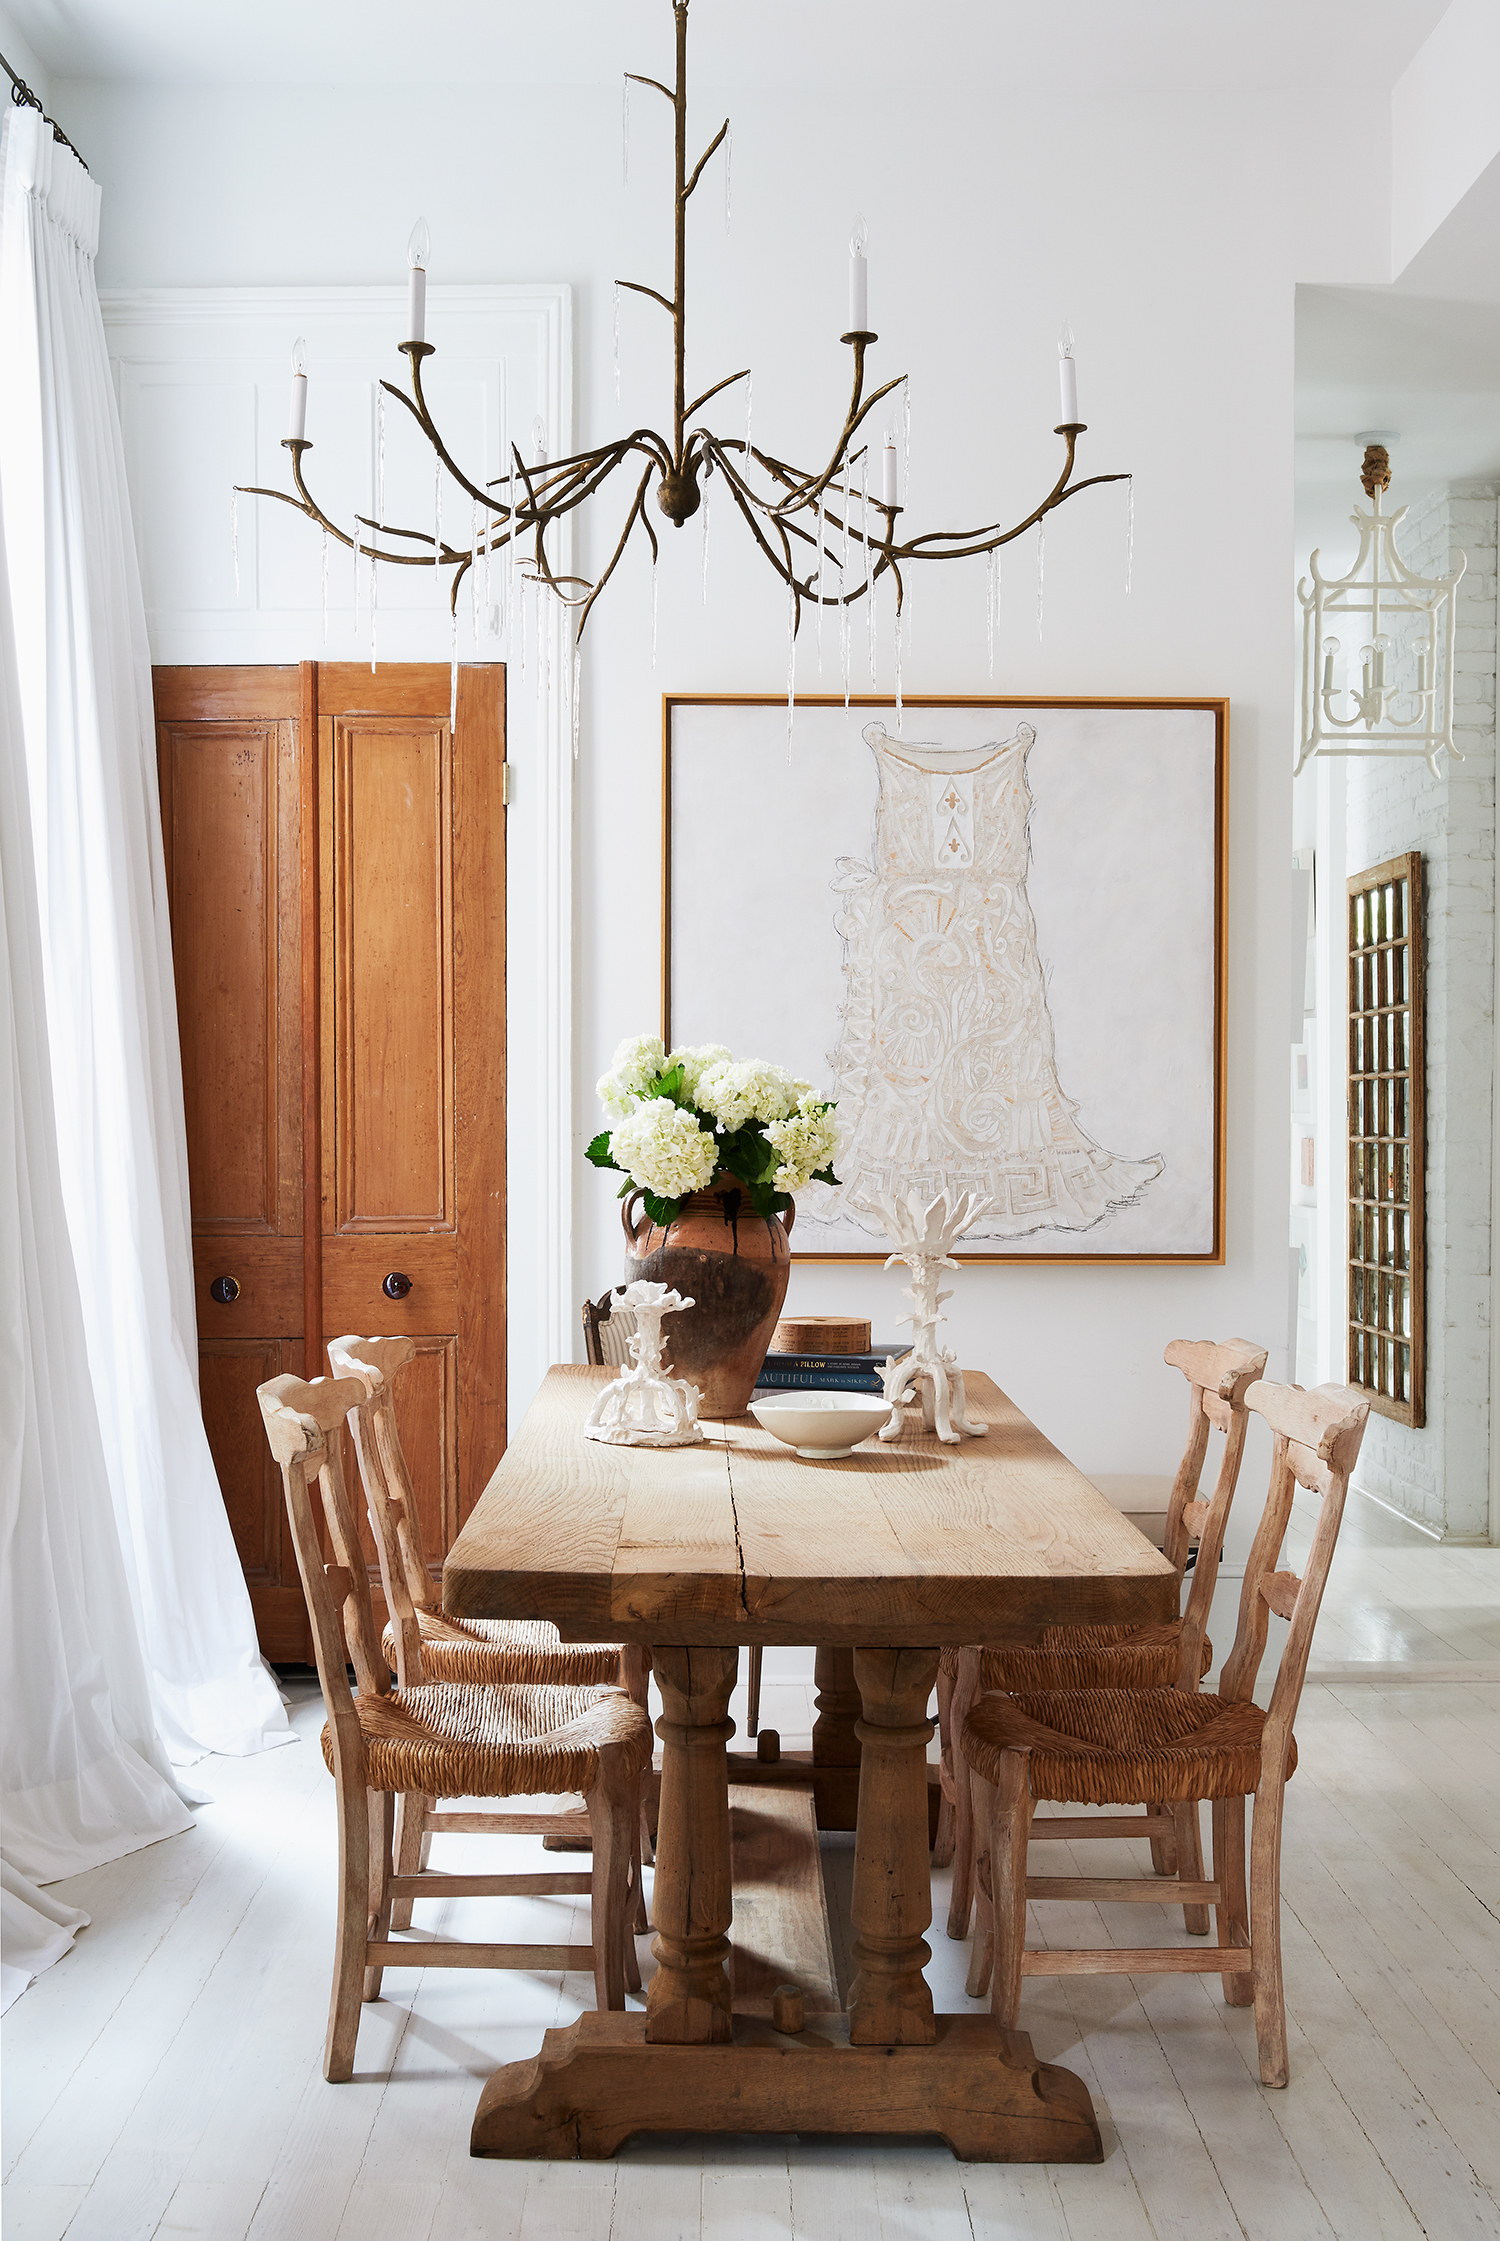 Julie Neill chandelier and her origianl artwork in the New Orleans home of Julie Neill in Garden and Gun Magazine by Alison Gootee photography